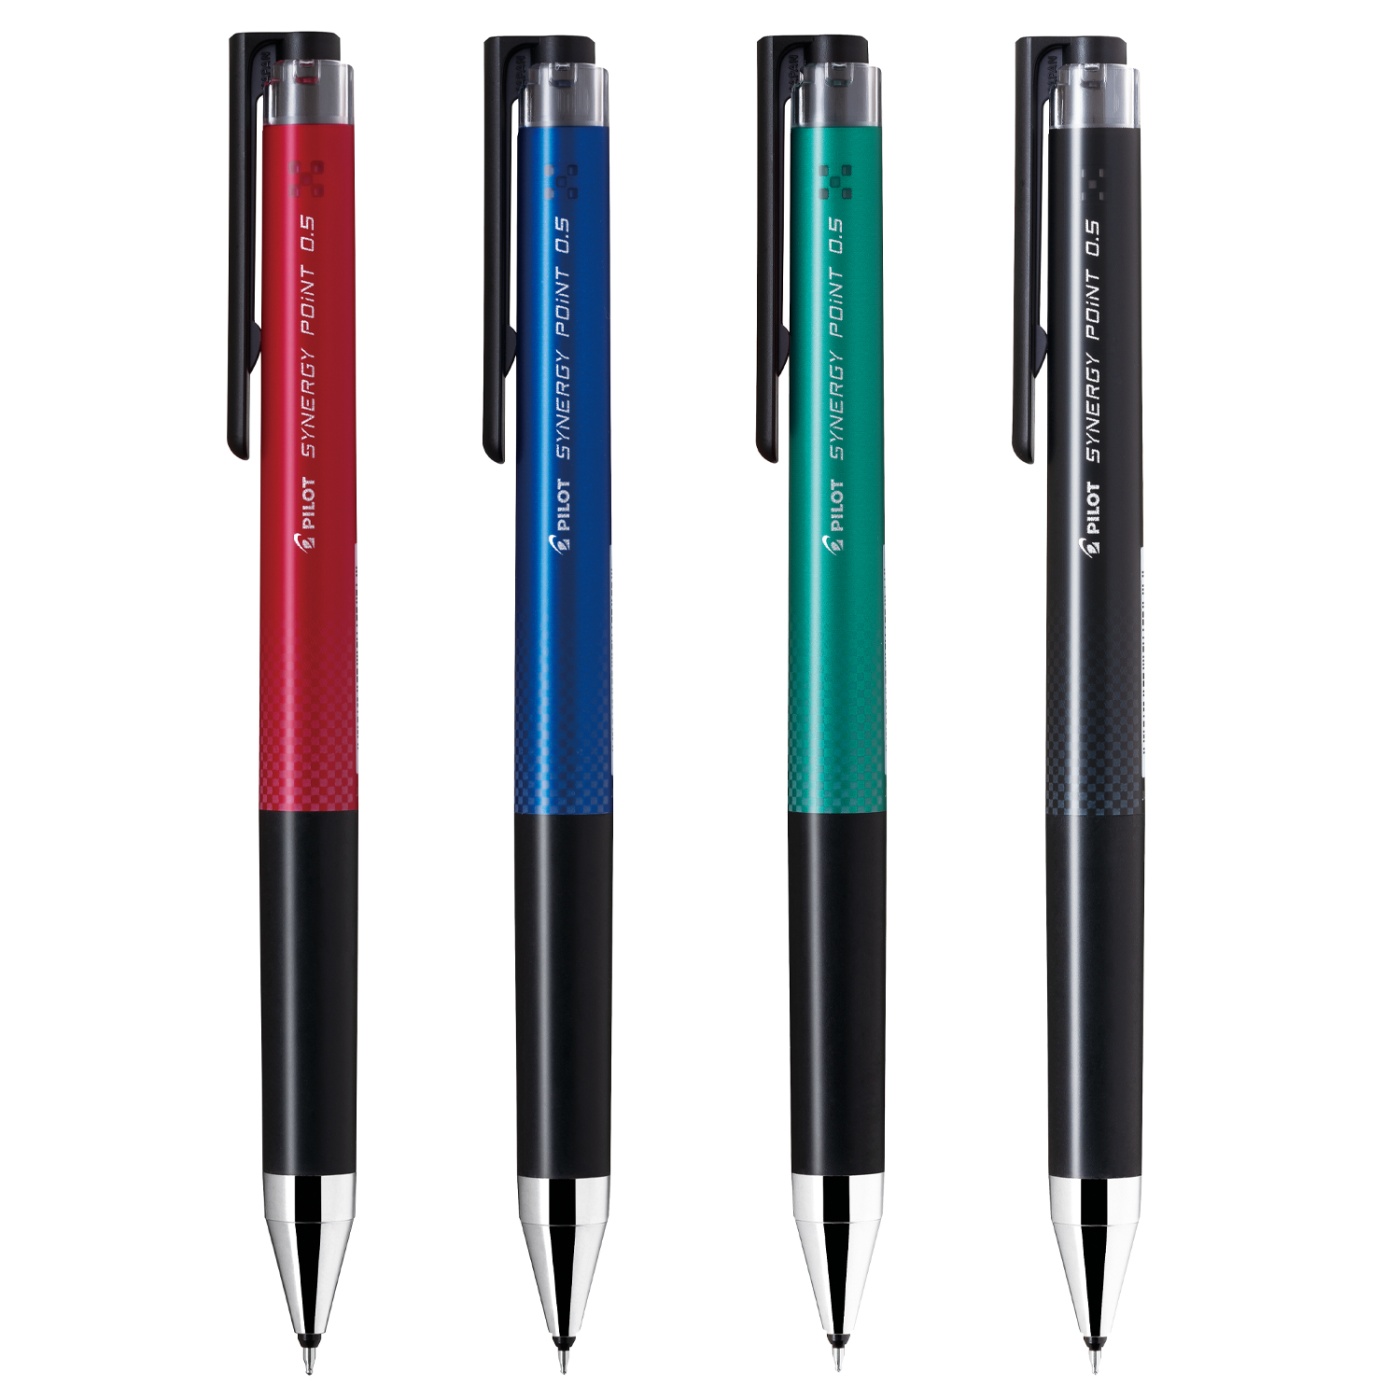 Synergy Point 0.5 in the group Pens / Writing / Gel Pens at Pen Store (109748_r)